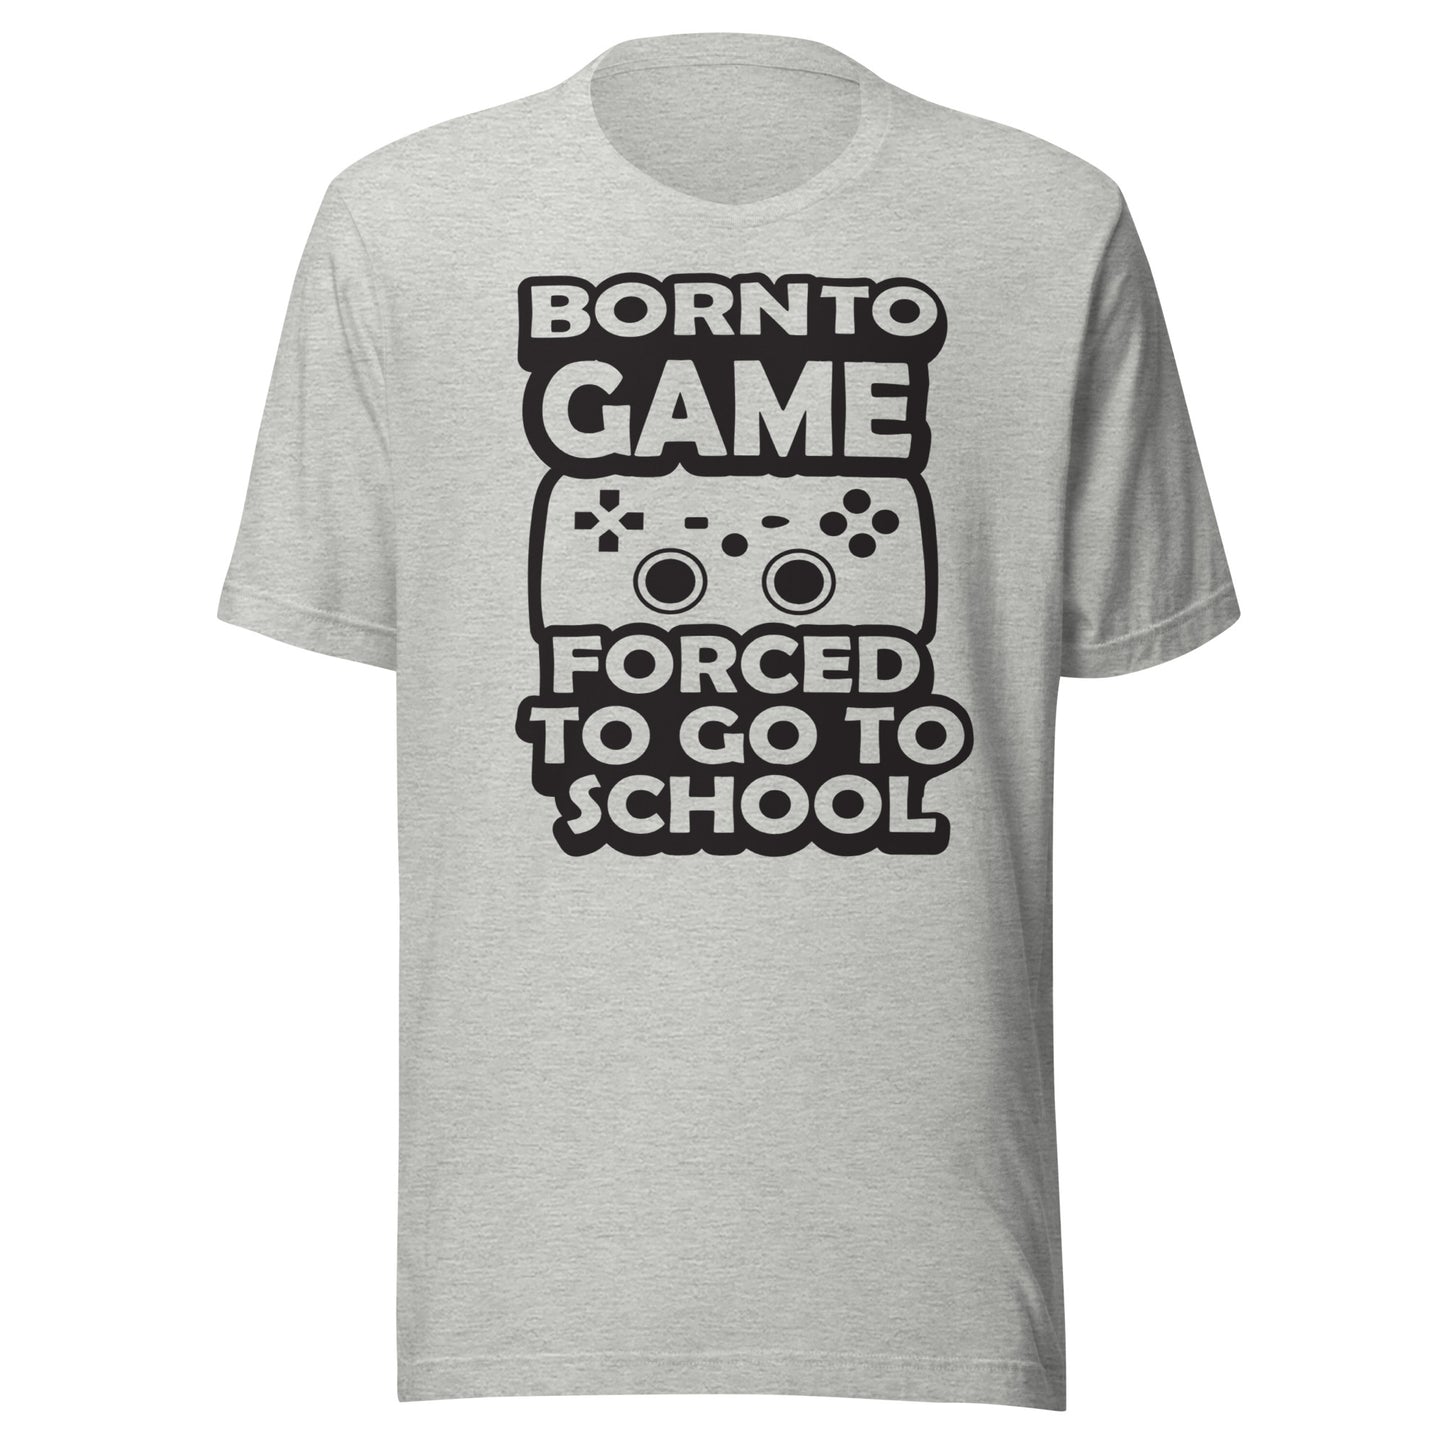 Born To Game Forced To Go To School Funny Gamer Gaming Gift Unisex T-Shirt